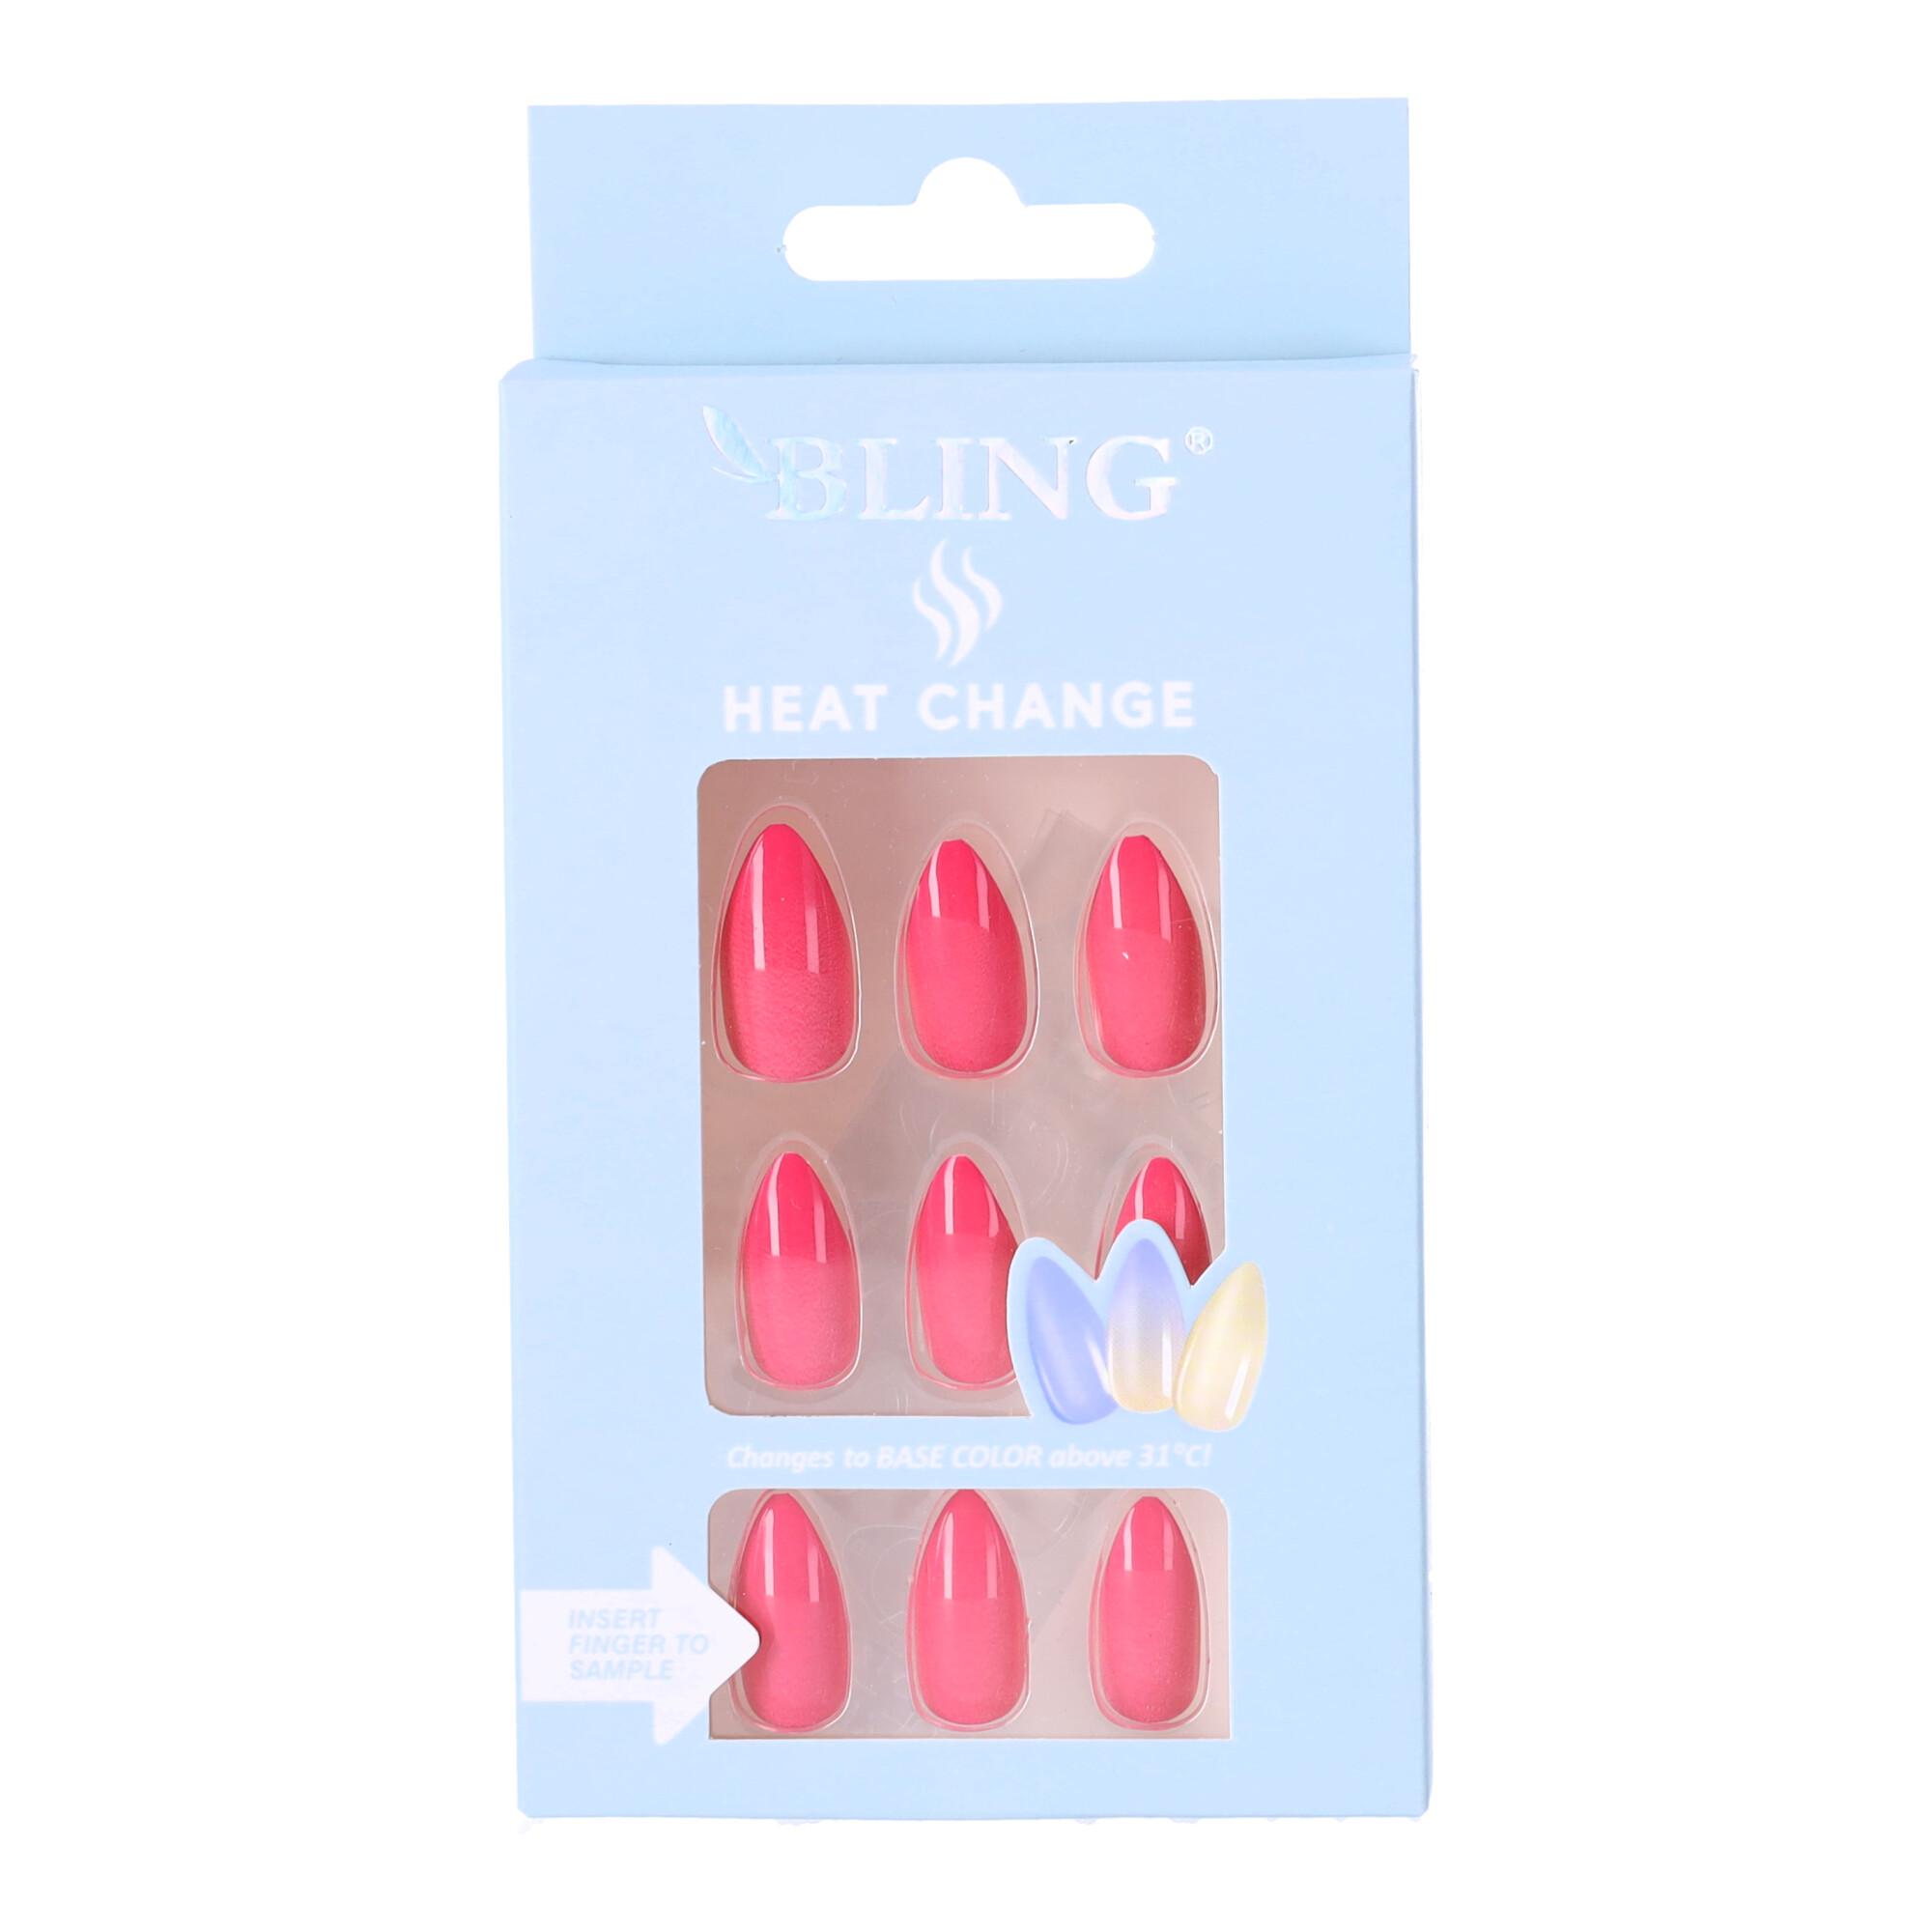 Artificial thermal nails Bling Heat Change Ombre (24 pcs.) - pink color